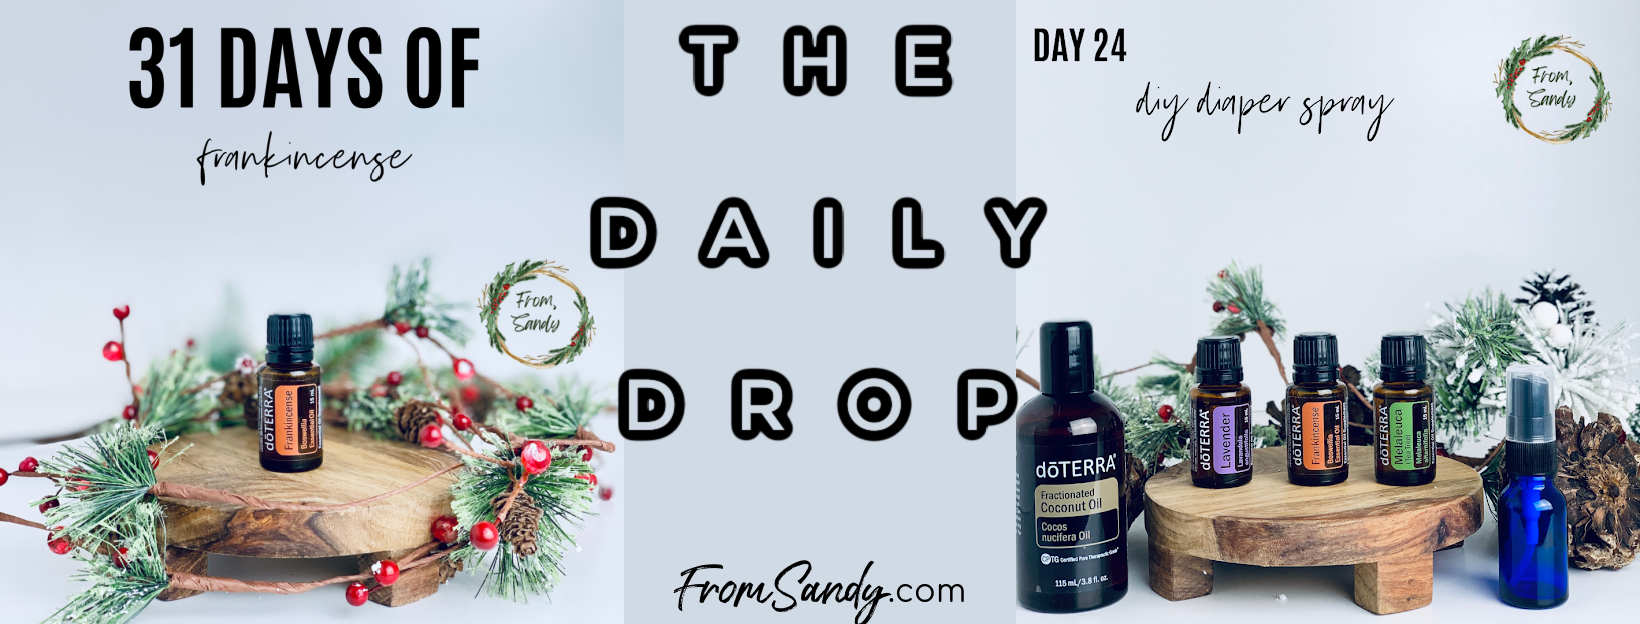 DIY Diaper Spray (31 Days of Frankincense: Day 24), From Sandy